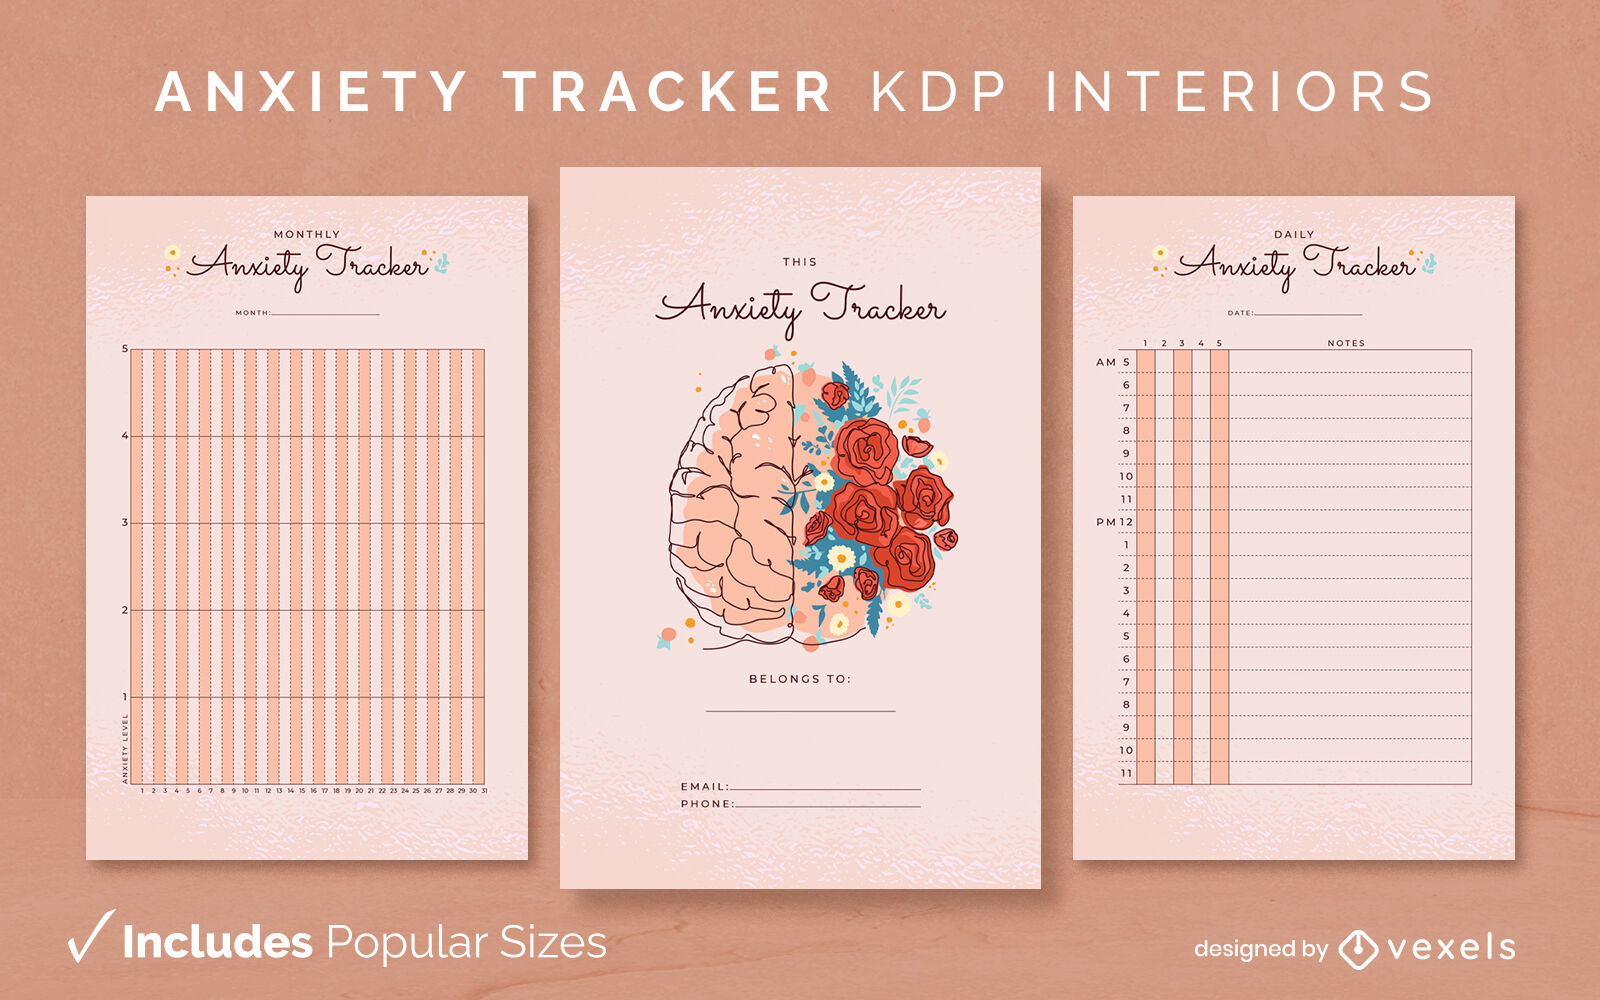 Mind anxiety Tracker Design Template KDP